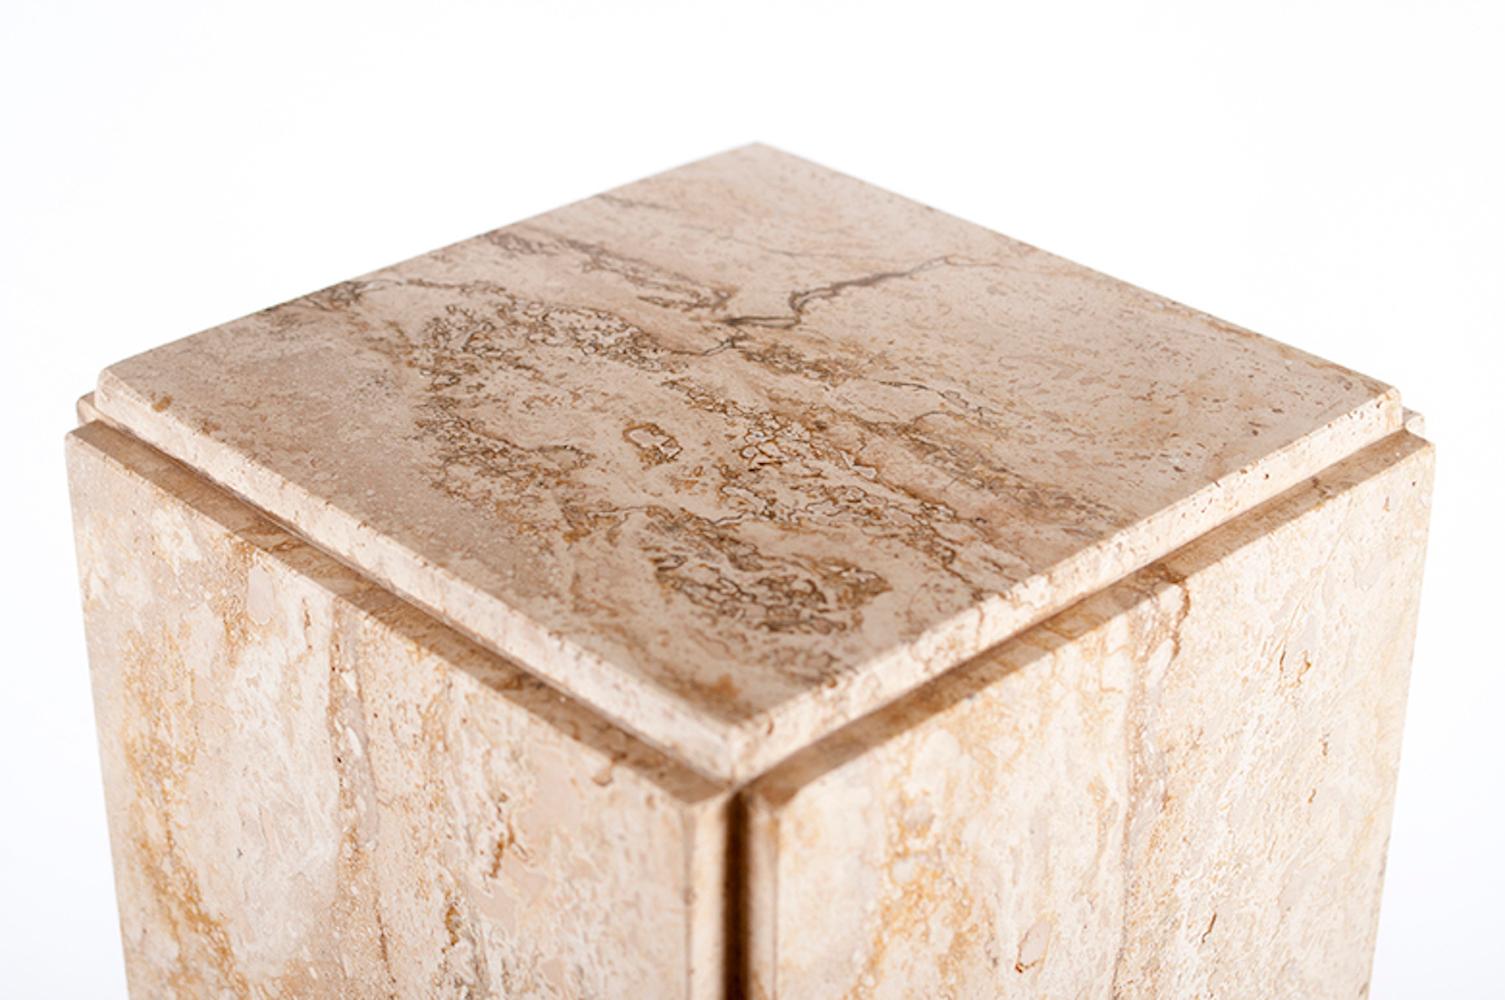 A vintage neutral toned rectangular travertine pedestal made in Italy. Standing 27’ tall, the pedestal is comprised of five slabs of marble situated on each other so that the corners are not flush. There are four felt pads on the bottom of the